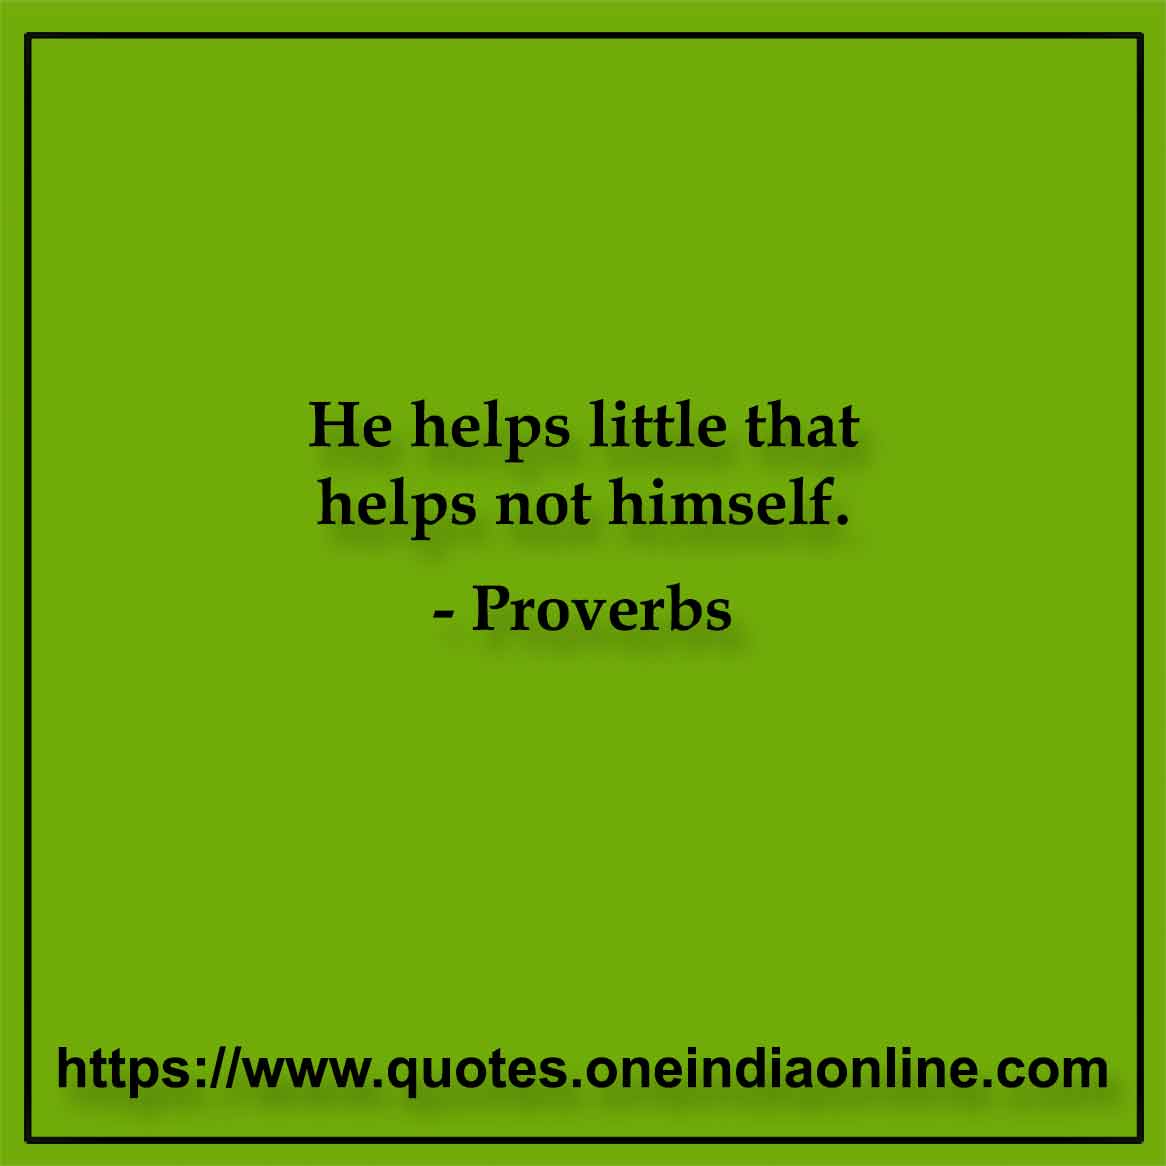 He helps little that helps not himself.

English 